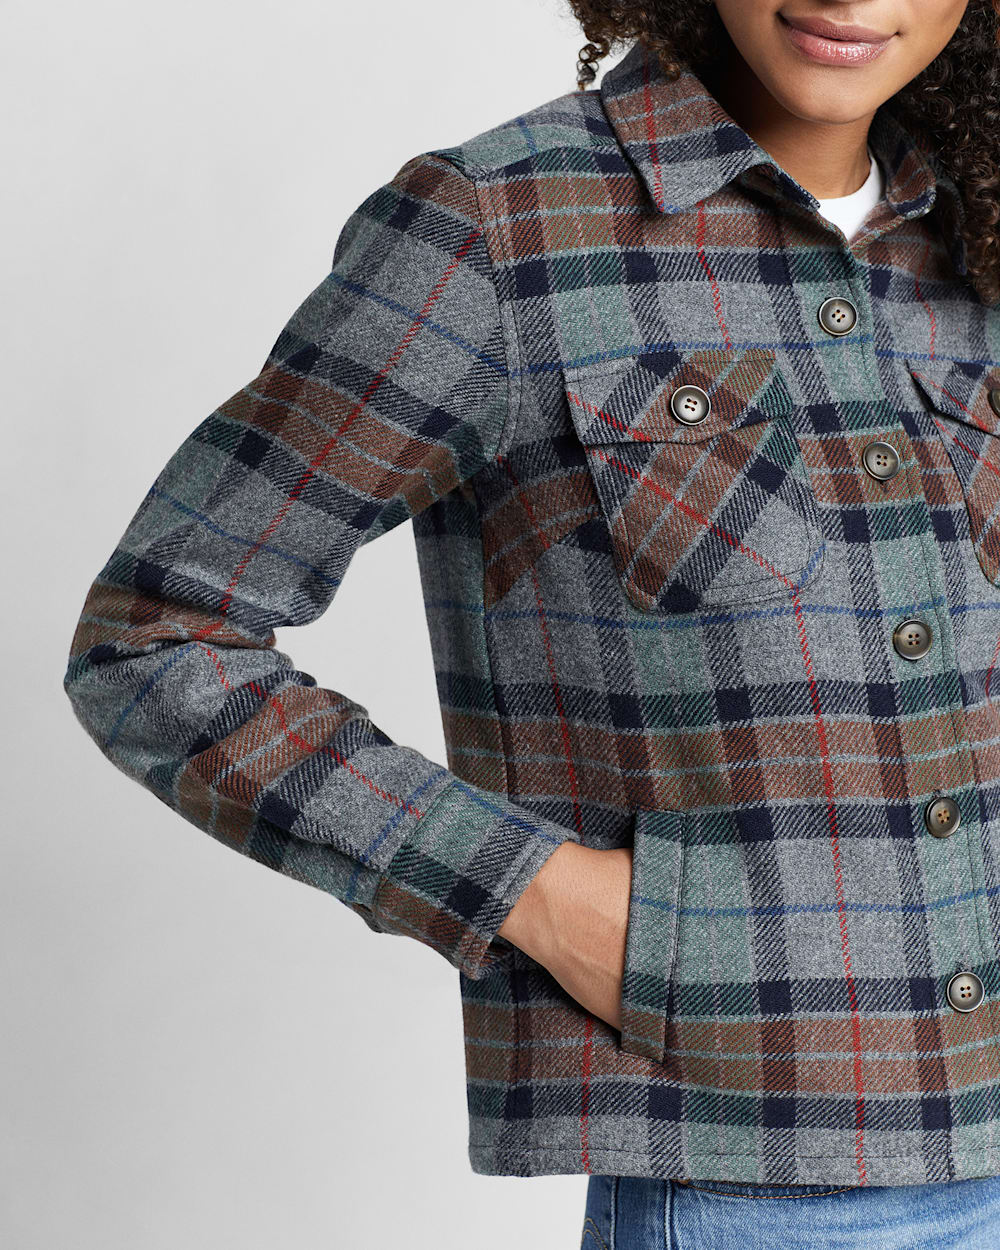 ALTERNATE VIEW OF WOMEN'S ROSLYN WOOL JACKET IN GREY MIX PLAID image number 5